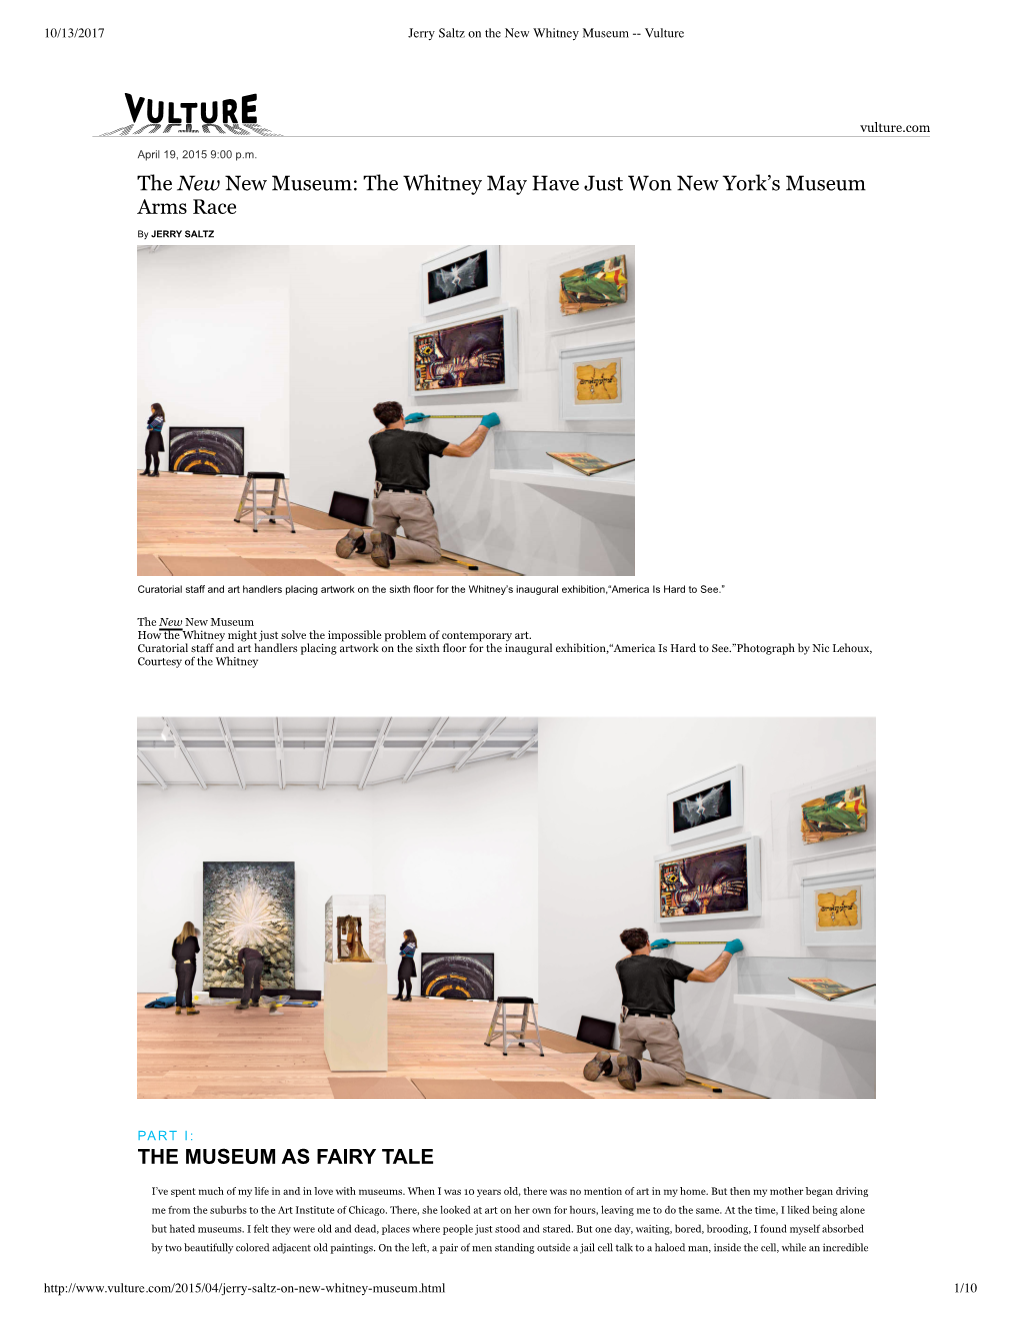 Jerry-Saltz-On-The-New-Whitney-Museum-Vulture.Pdf